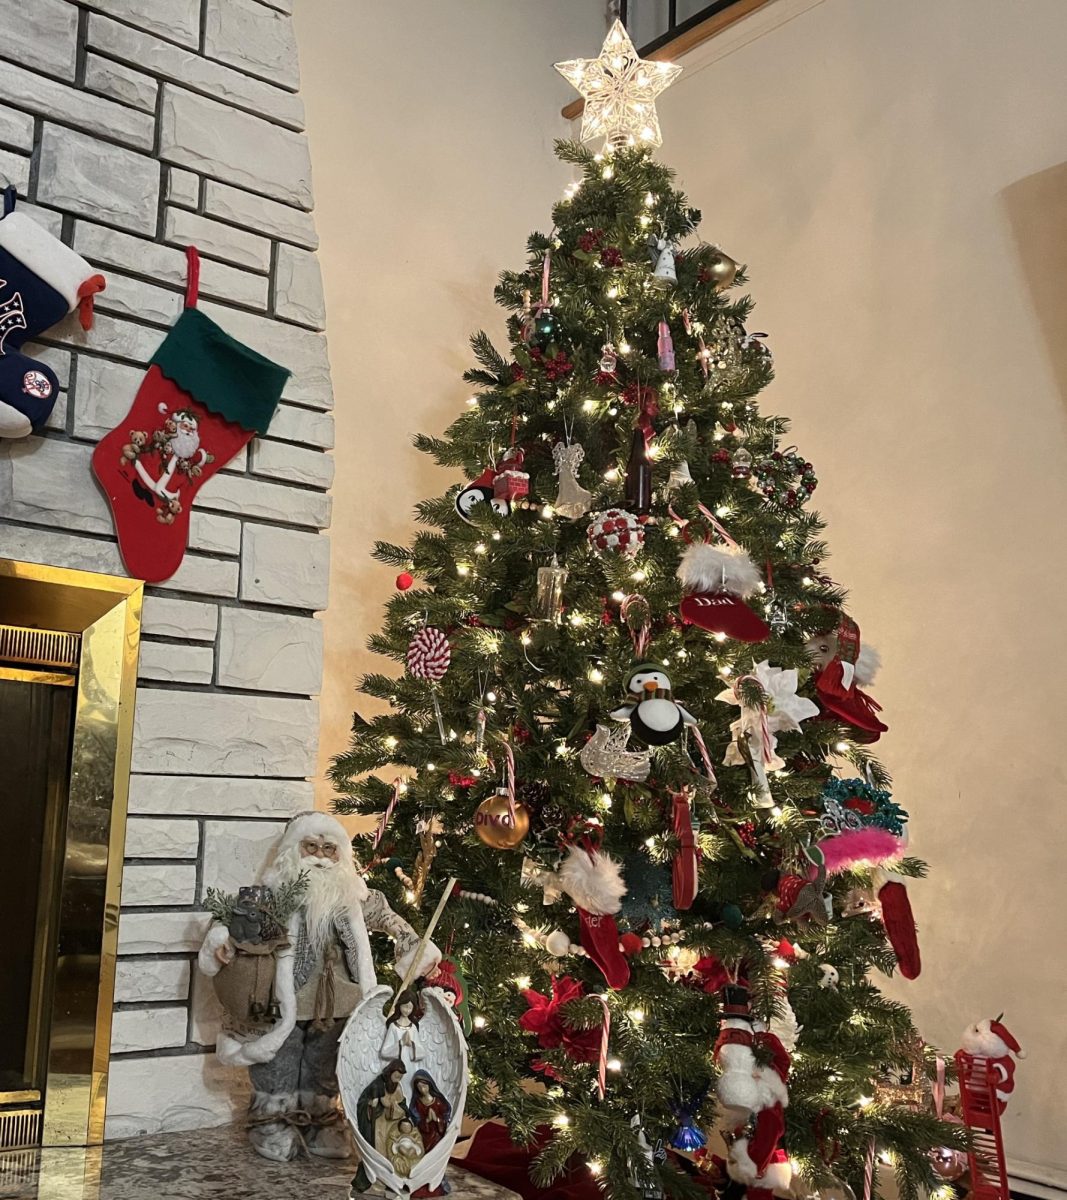 One part of tradition shared by many is the Christmas tree, each with its own origin.